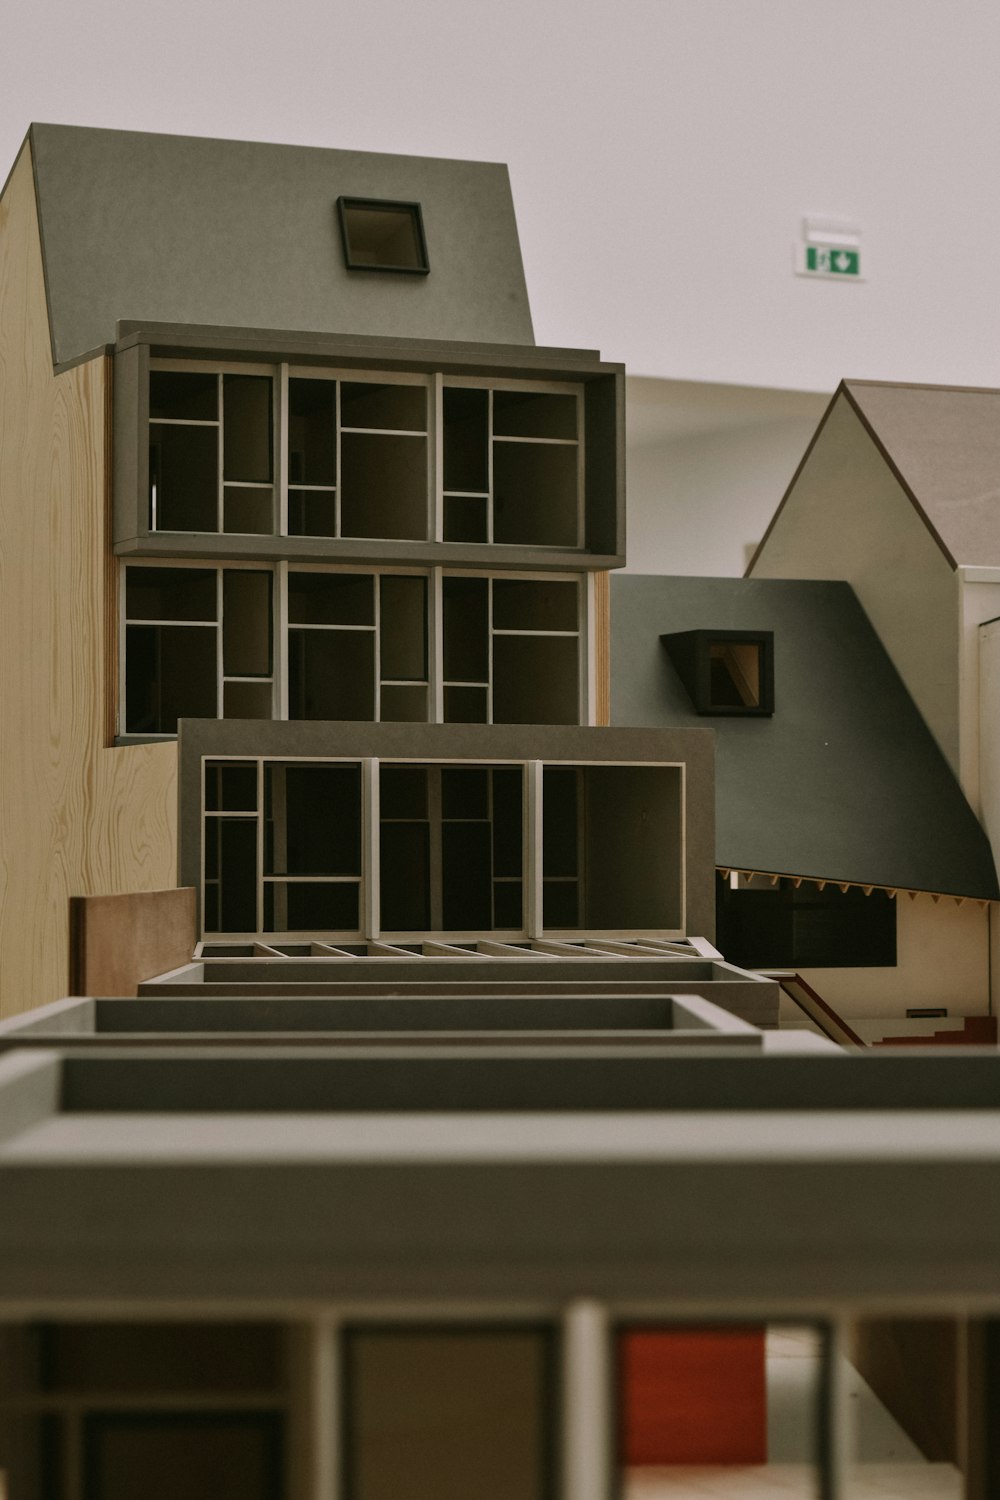 a model of a house is shown in the foreground